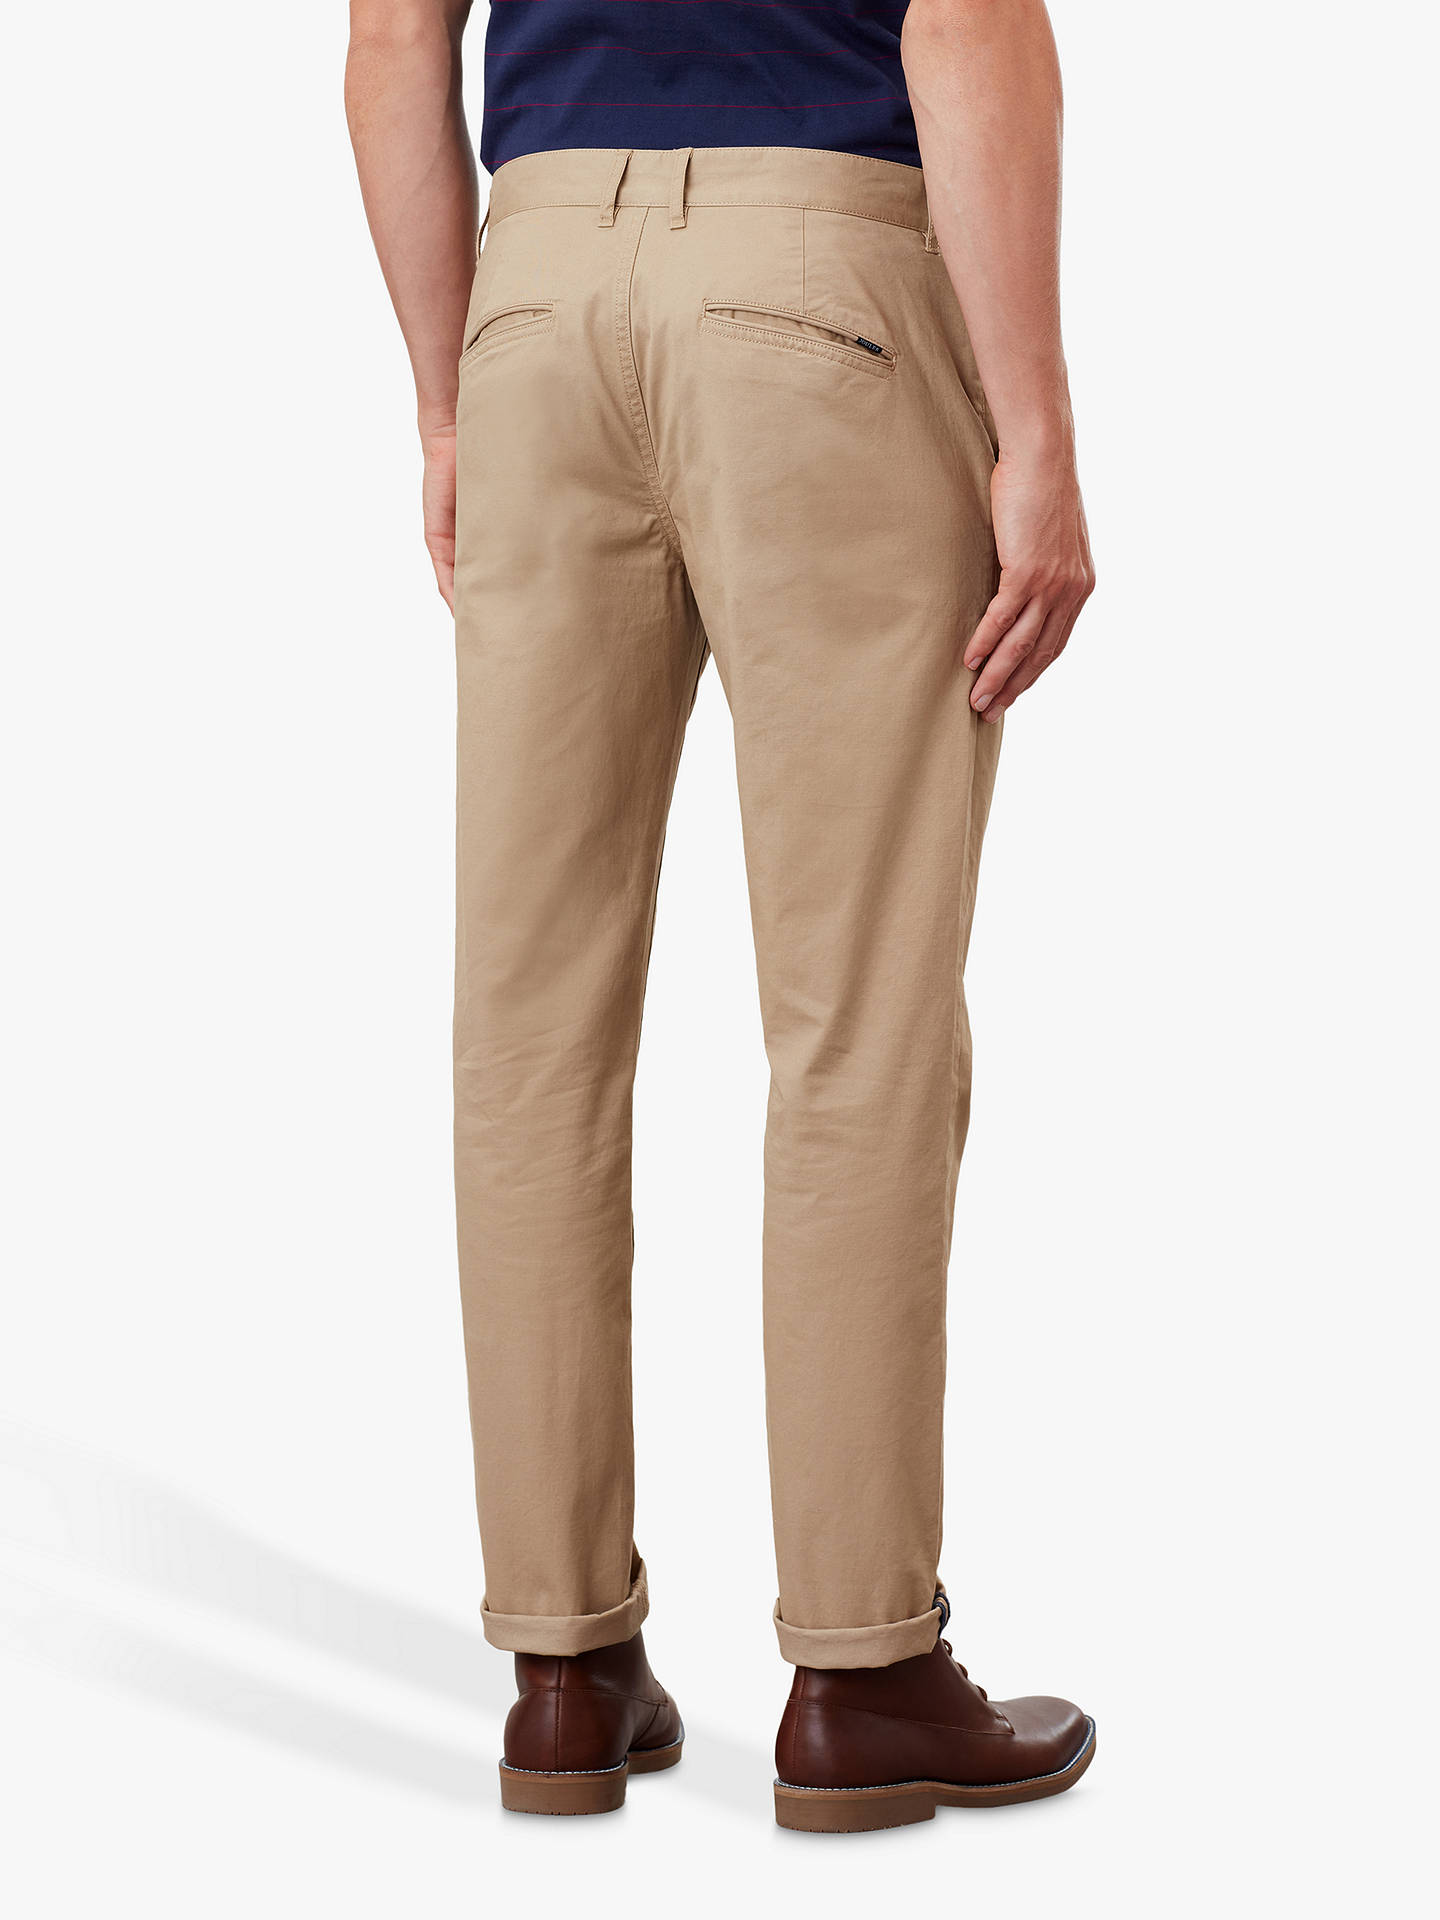 Joules Slim Fit Chinos, Light Brown at John Lewis & Partners